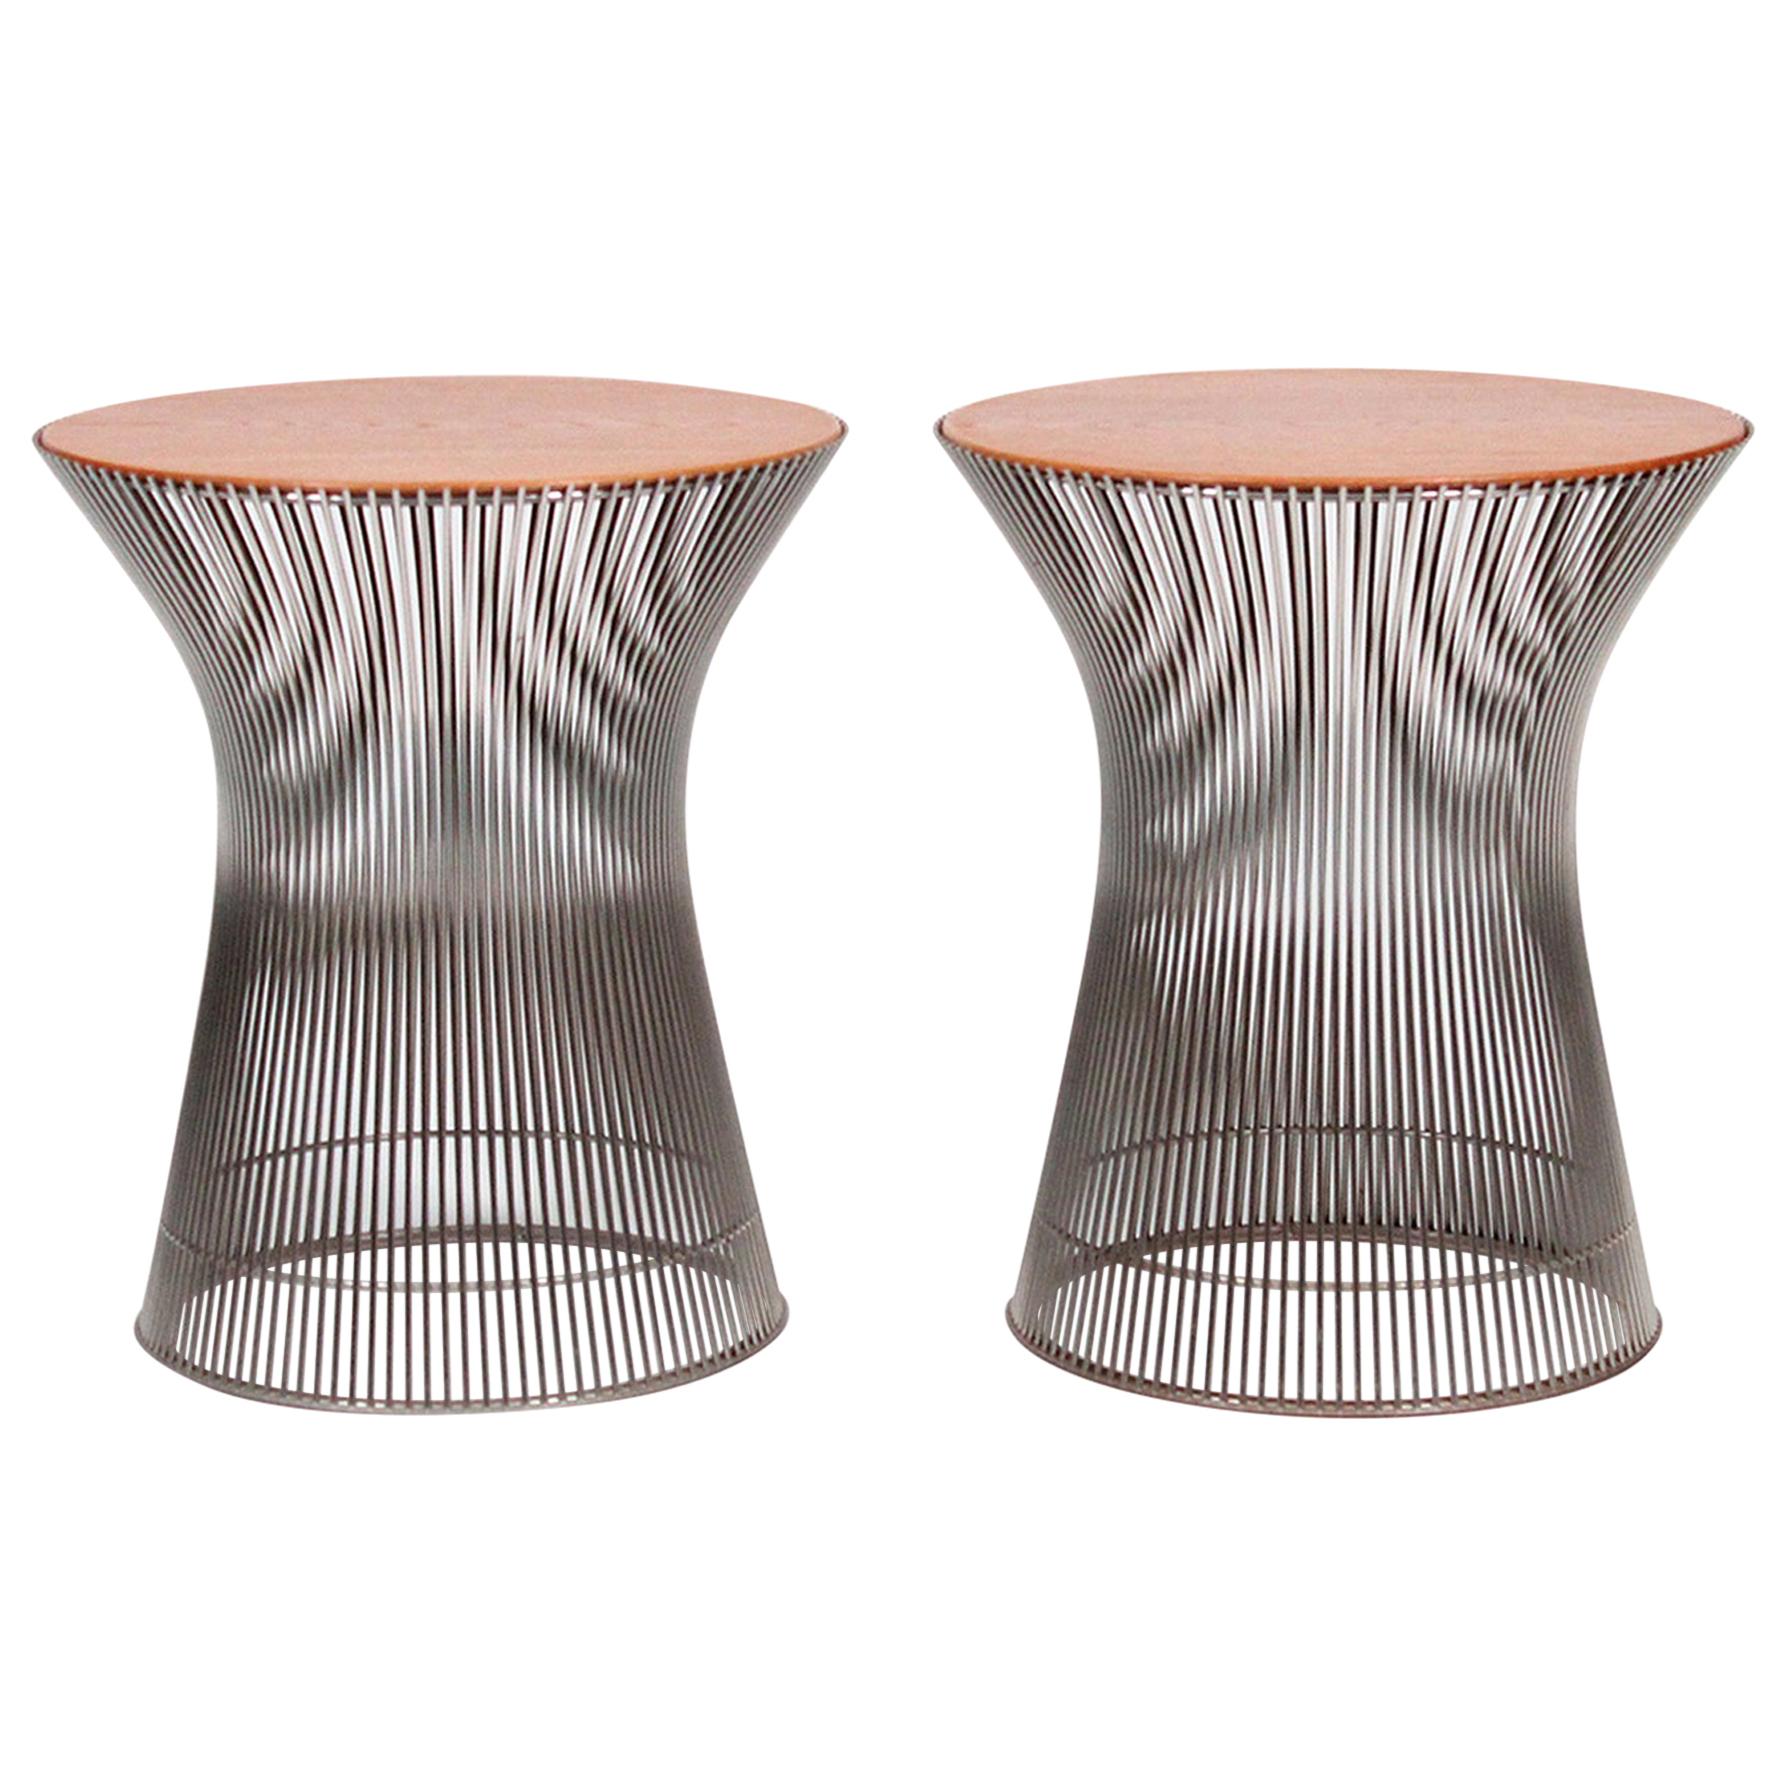 Pair of Side Tables by Warren Platner for Knoll